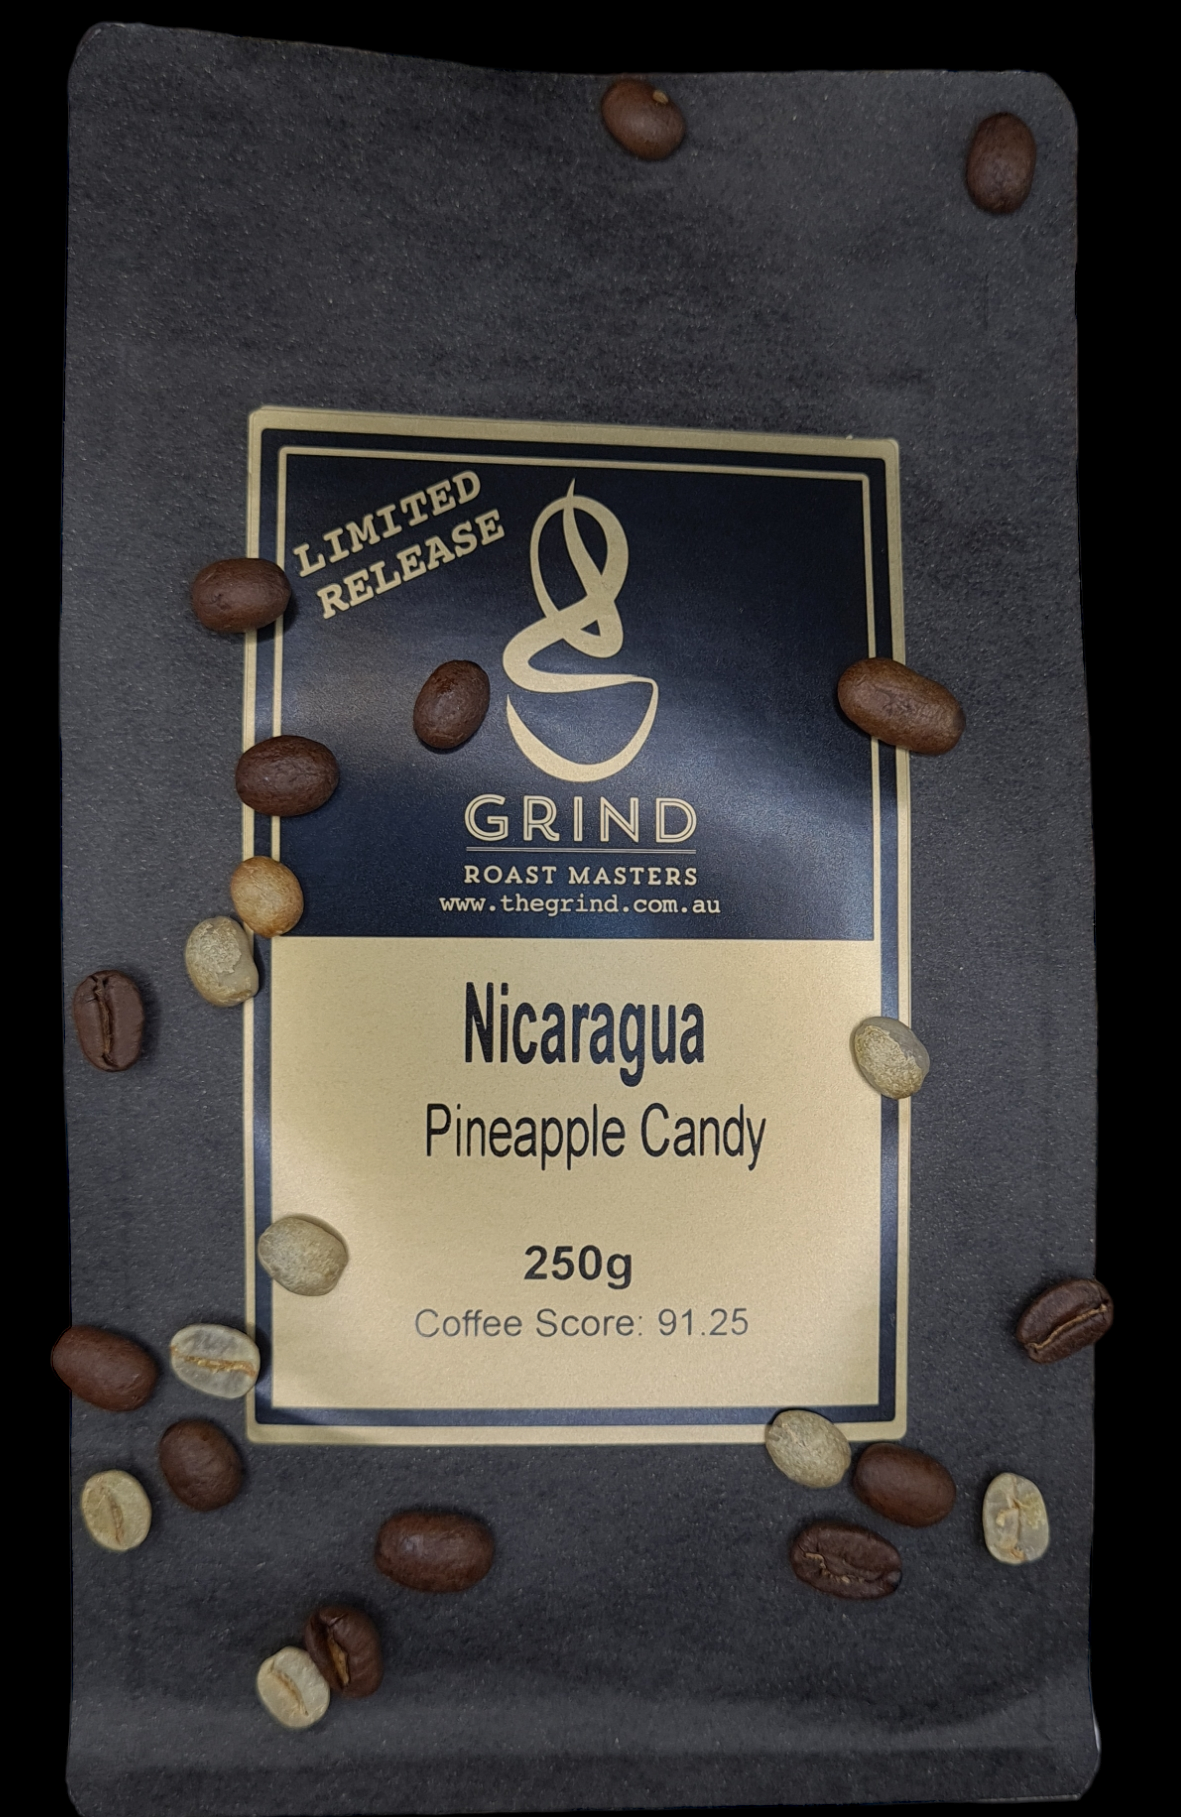 Nicaragua Pineapple Candy - Premium Coffee from $18.00. Shop now at Grind Roast Masters